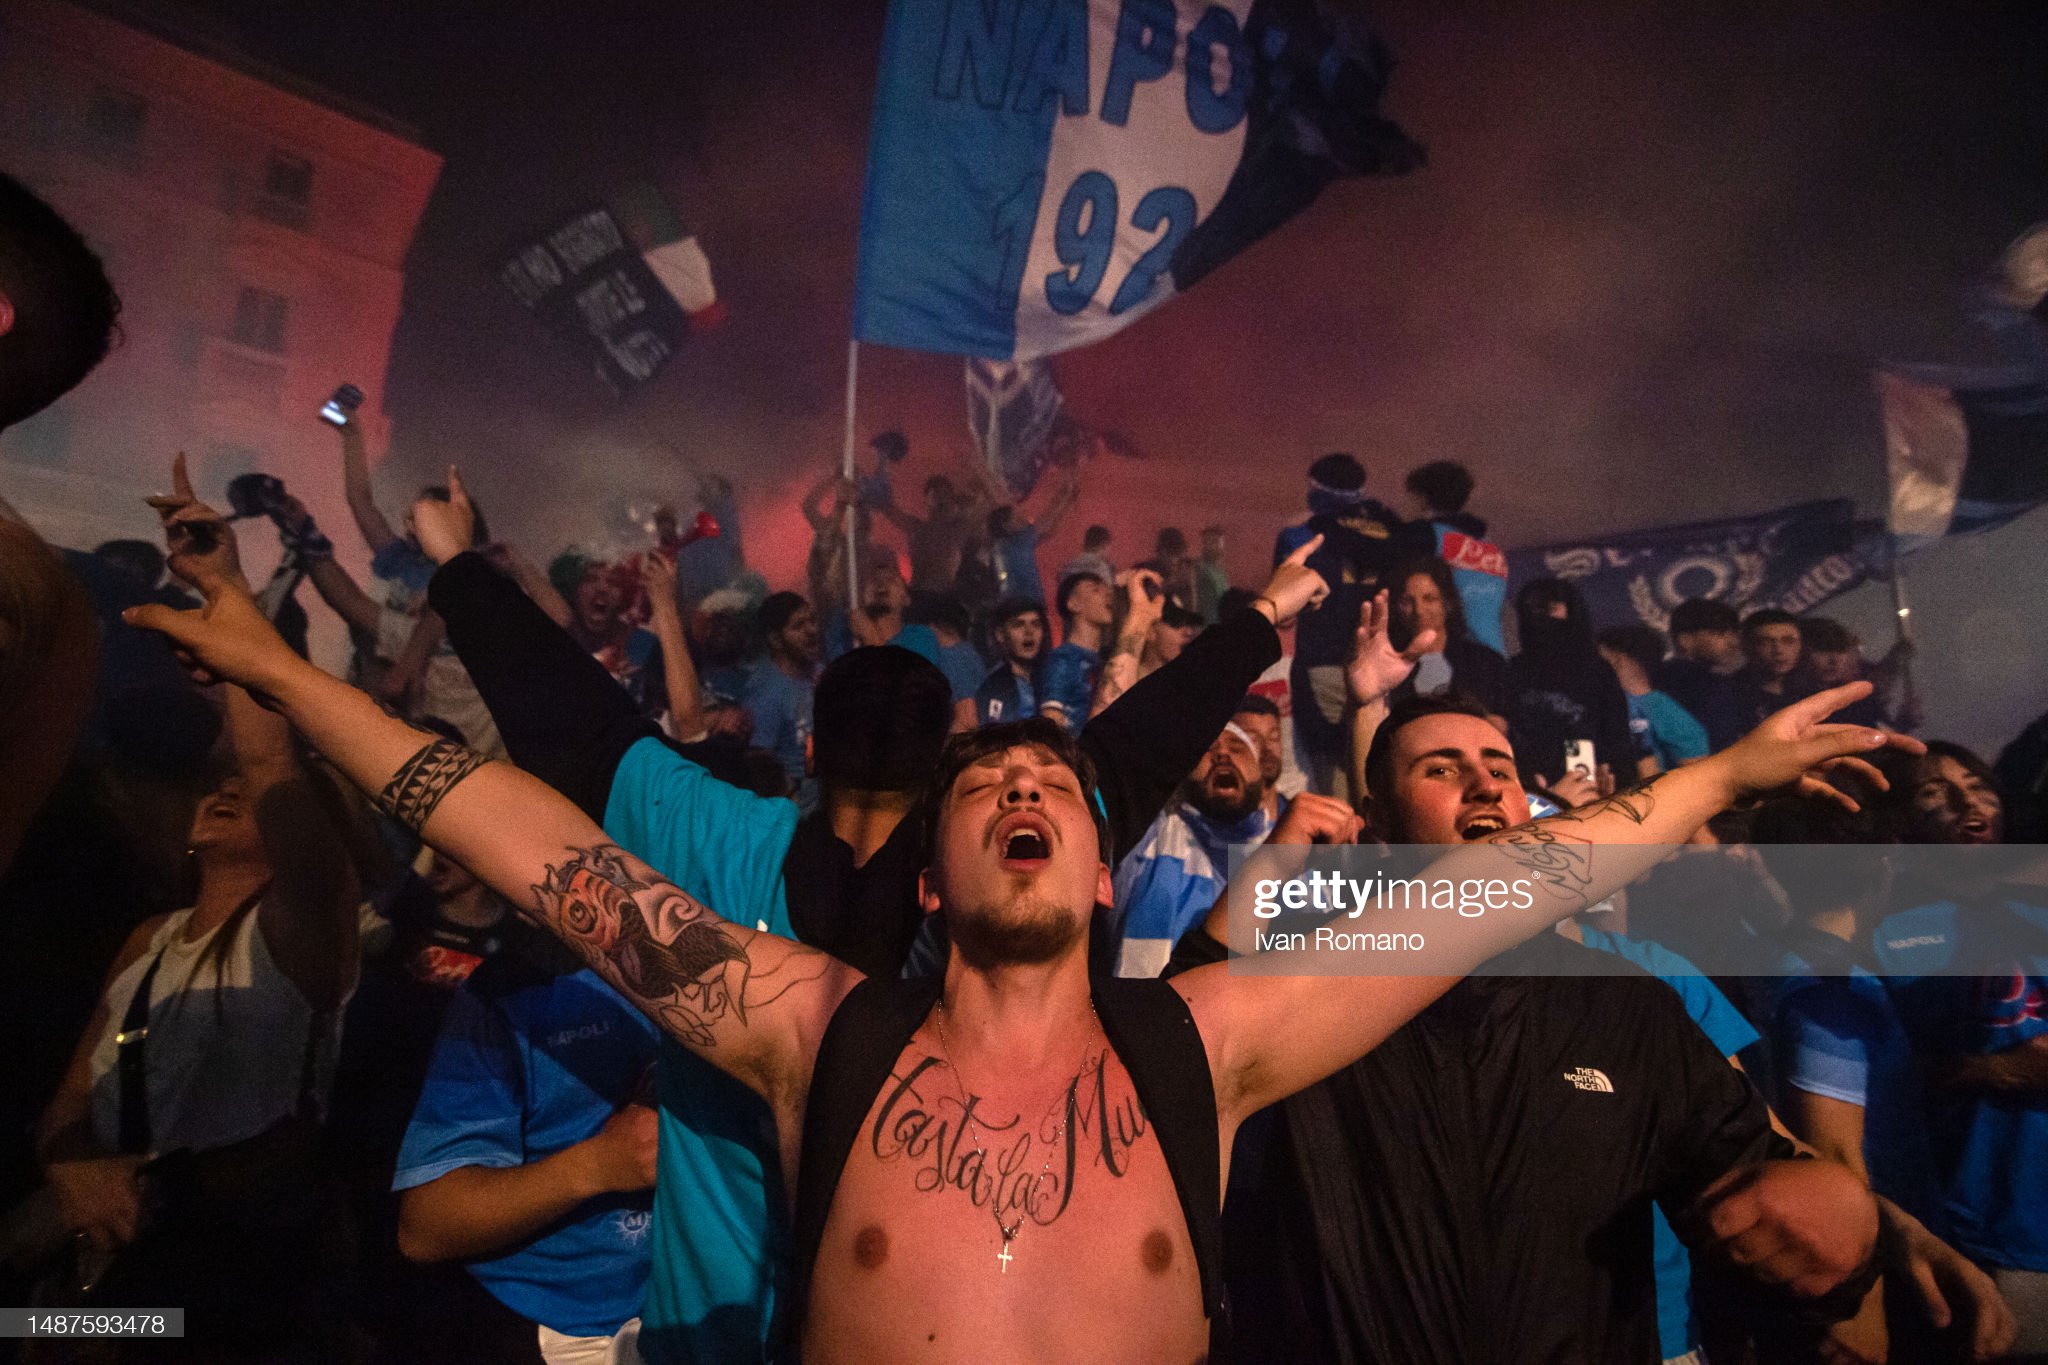 Napoli's Scudetto Win Turns Bloody As Over 200 Fans Sustain Injuries, Man Short Dead